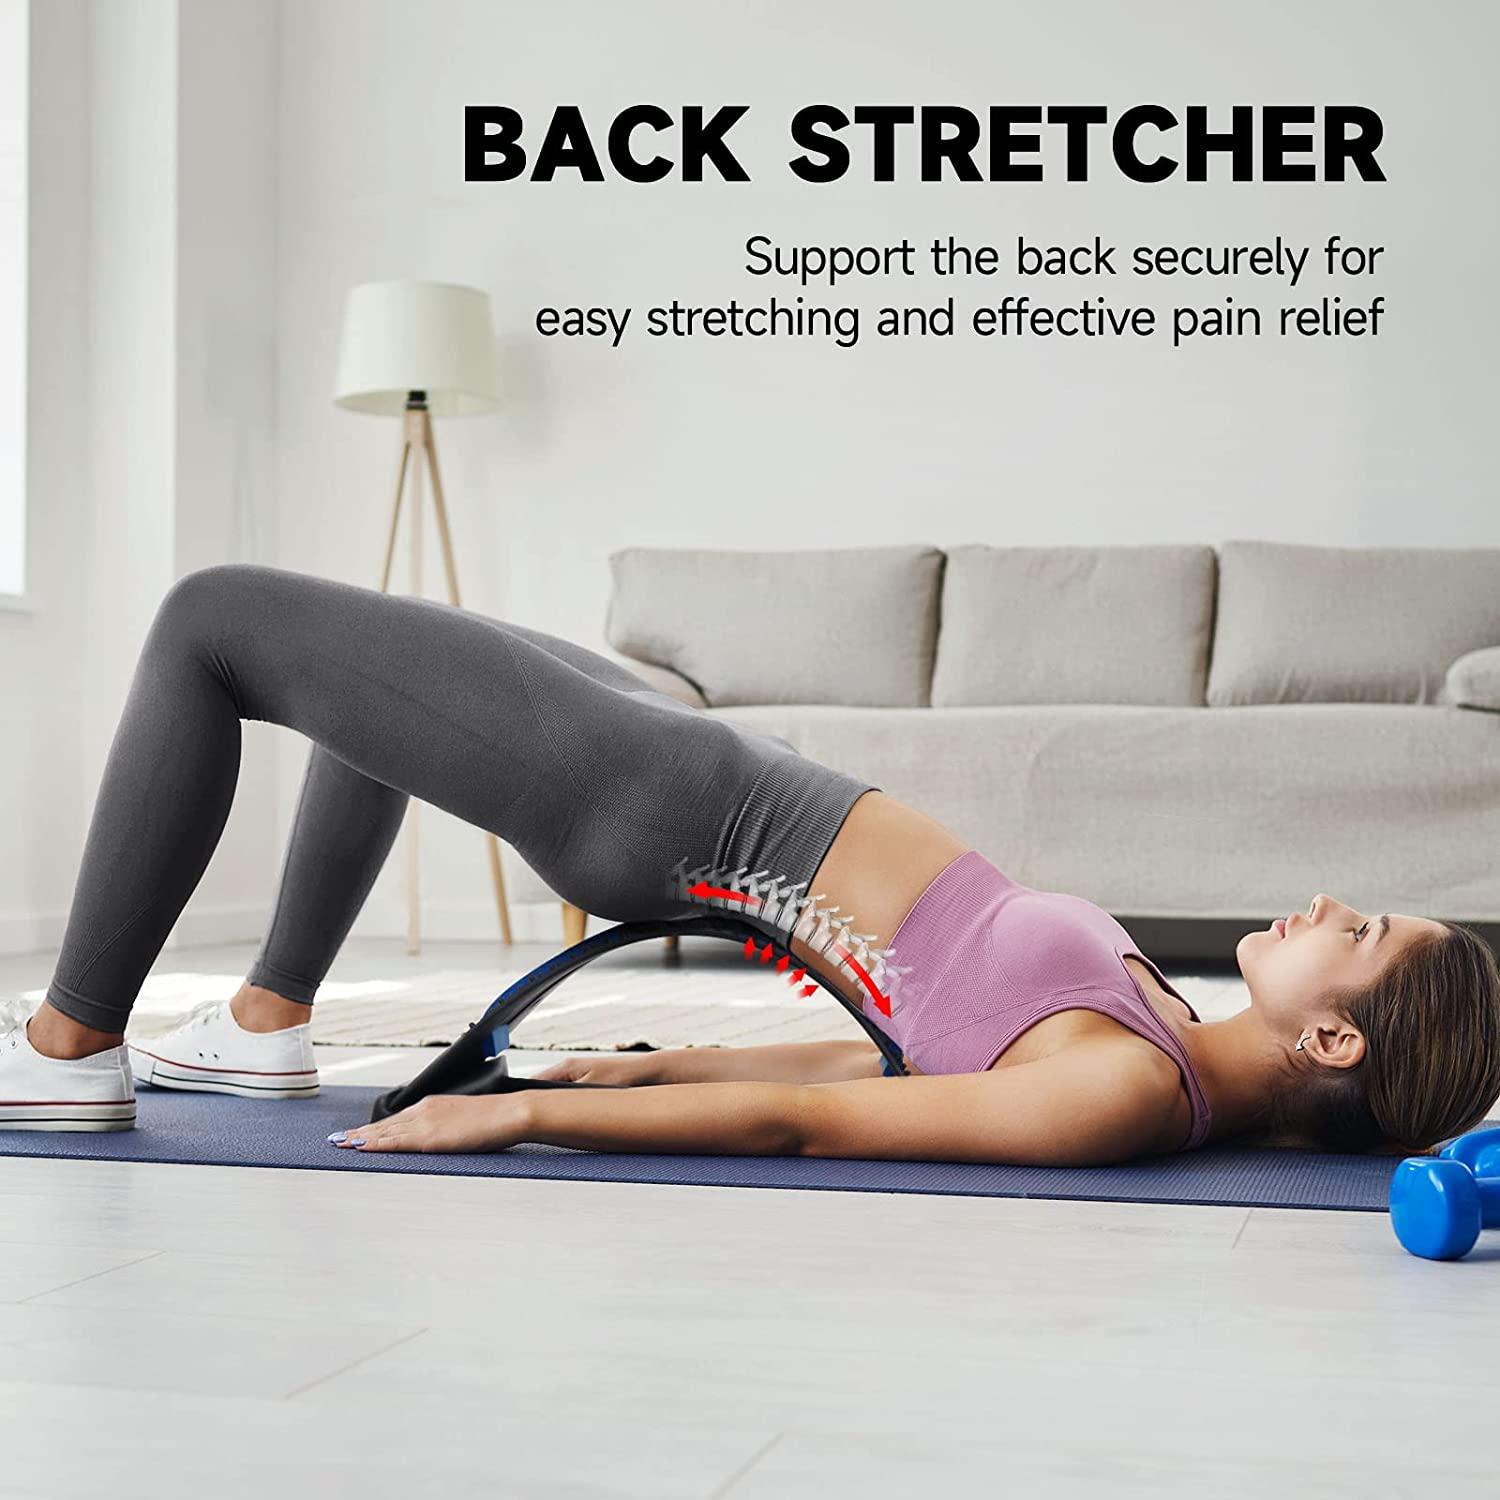 Back Cracker Back Stretcher American Lifetime Back Pain Relief Products